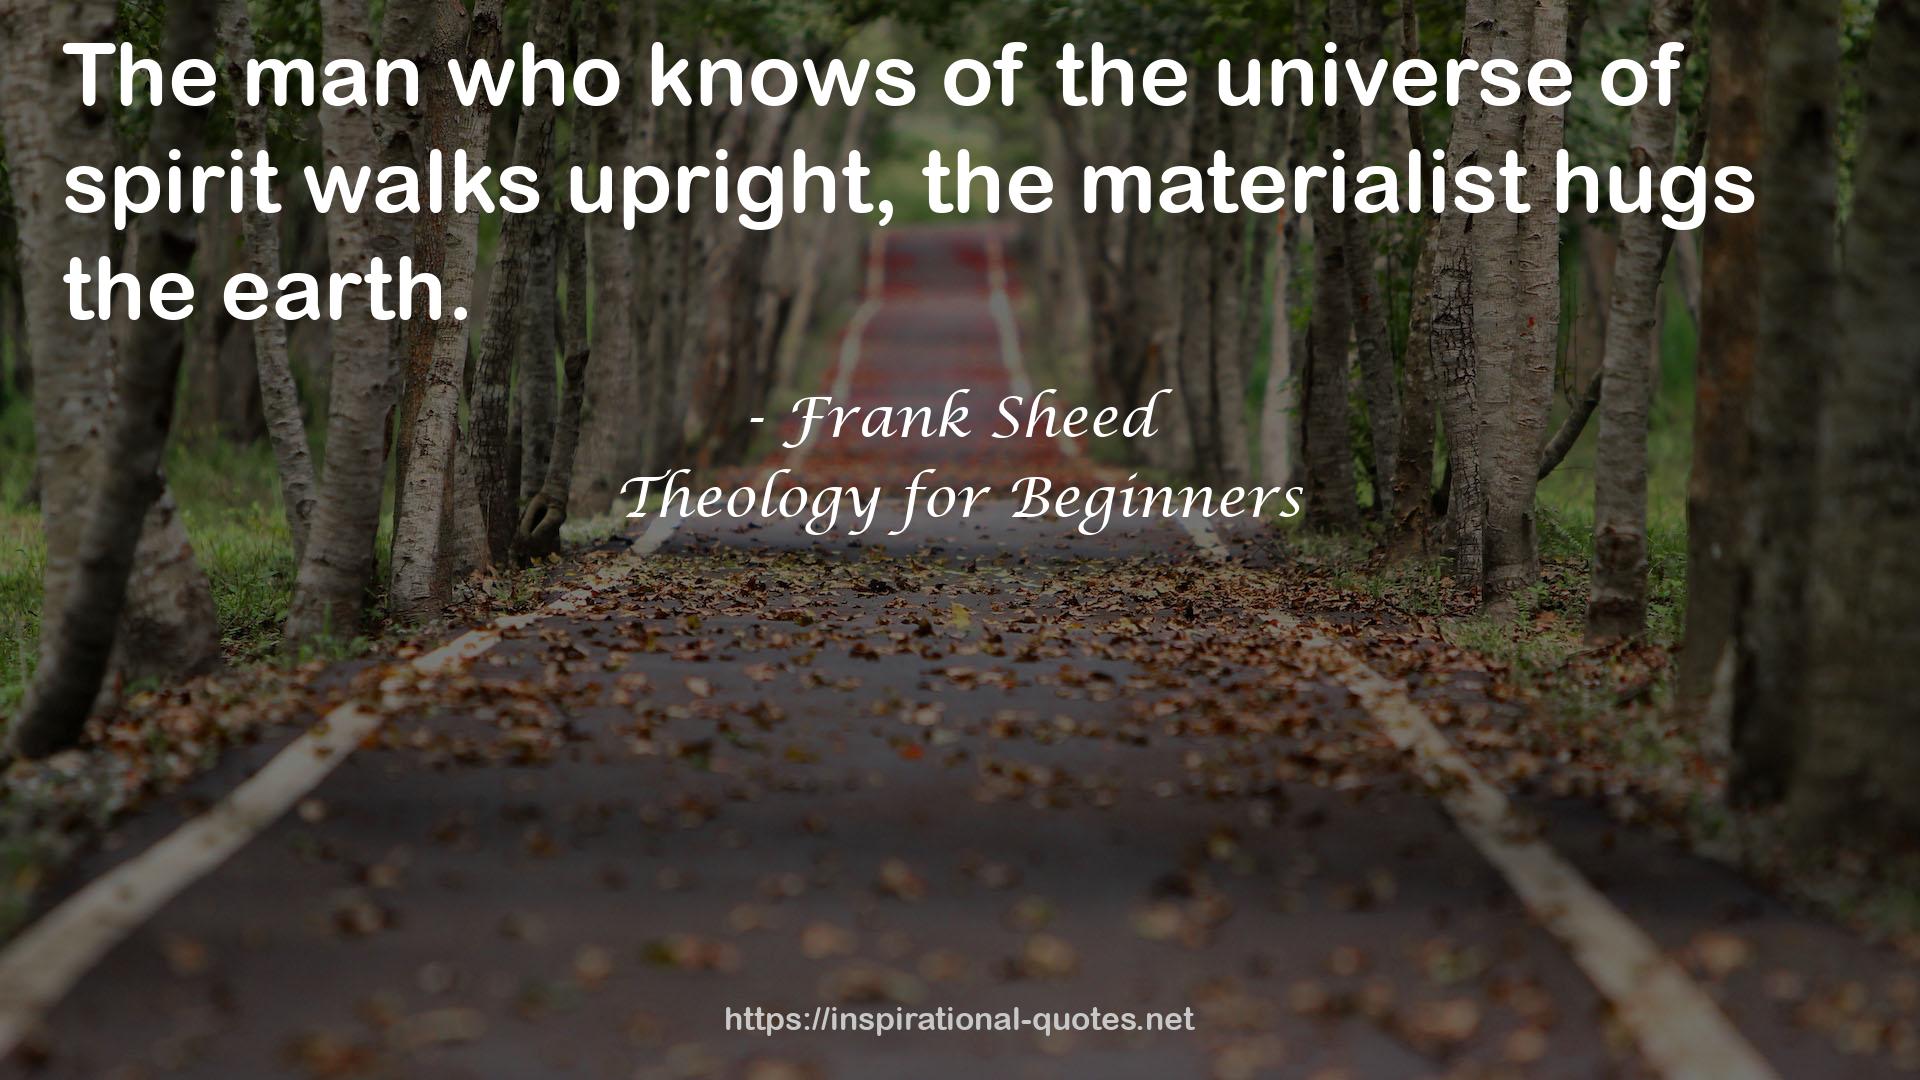 Theology for Beginners QUOTES